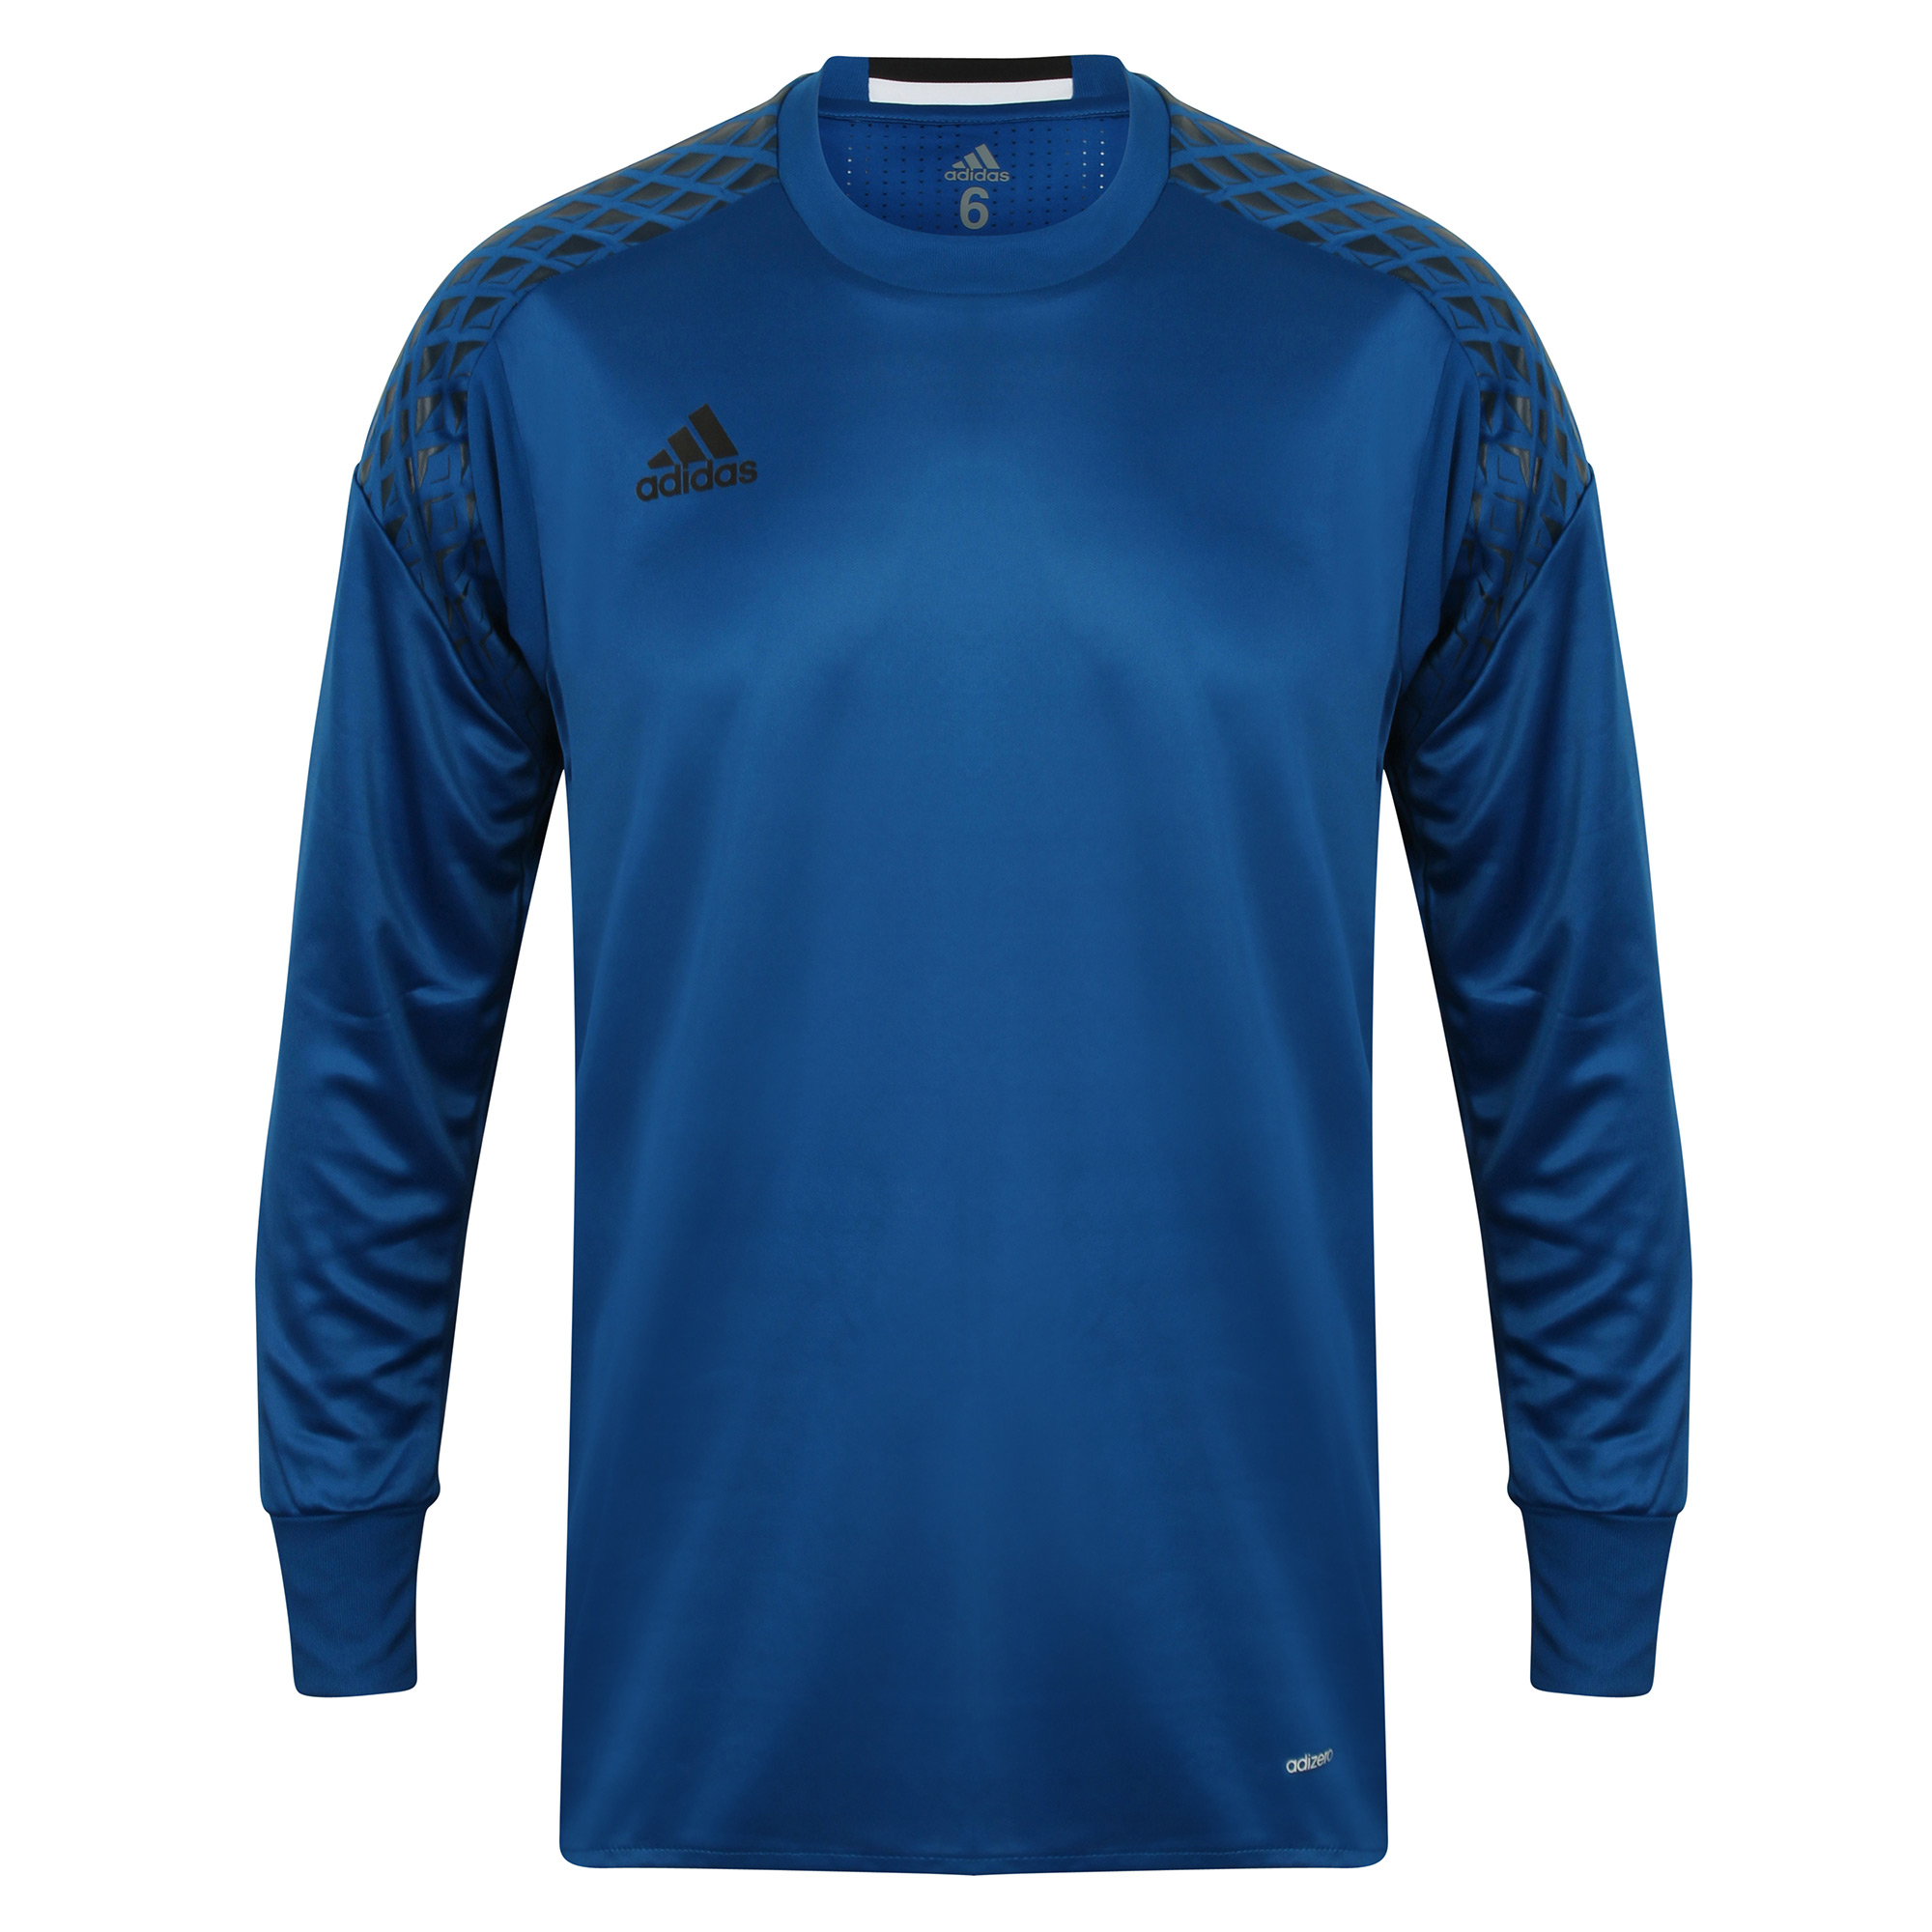 adidas Onore Keepersshirt Blauw